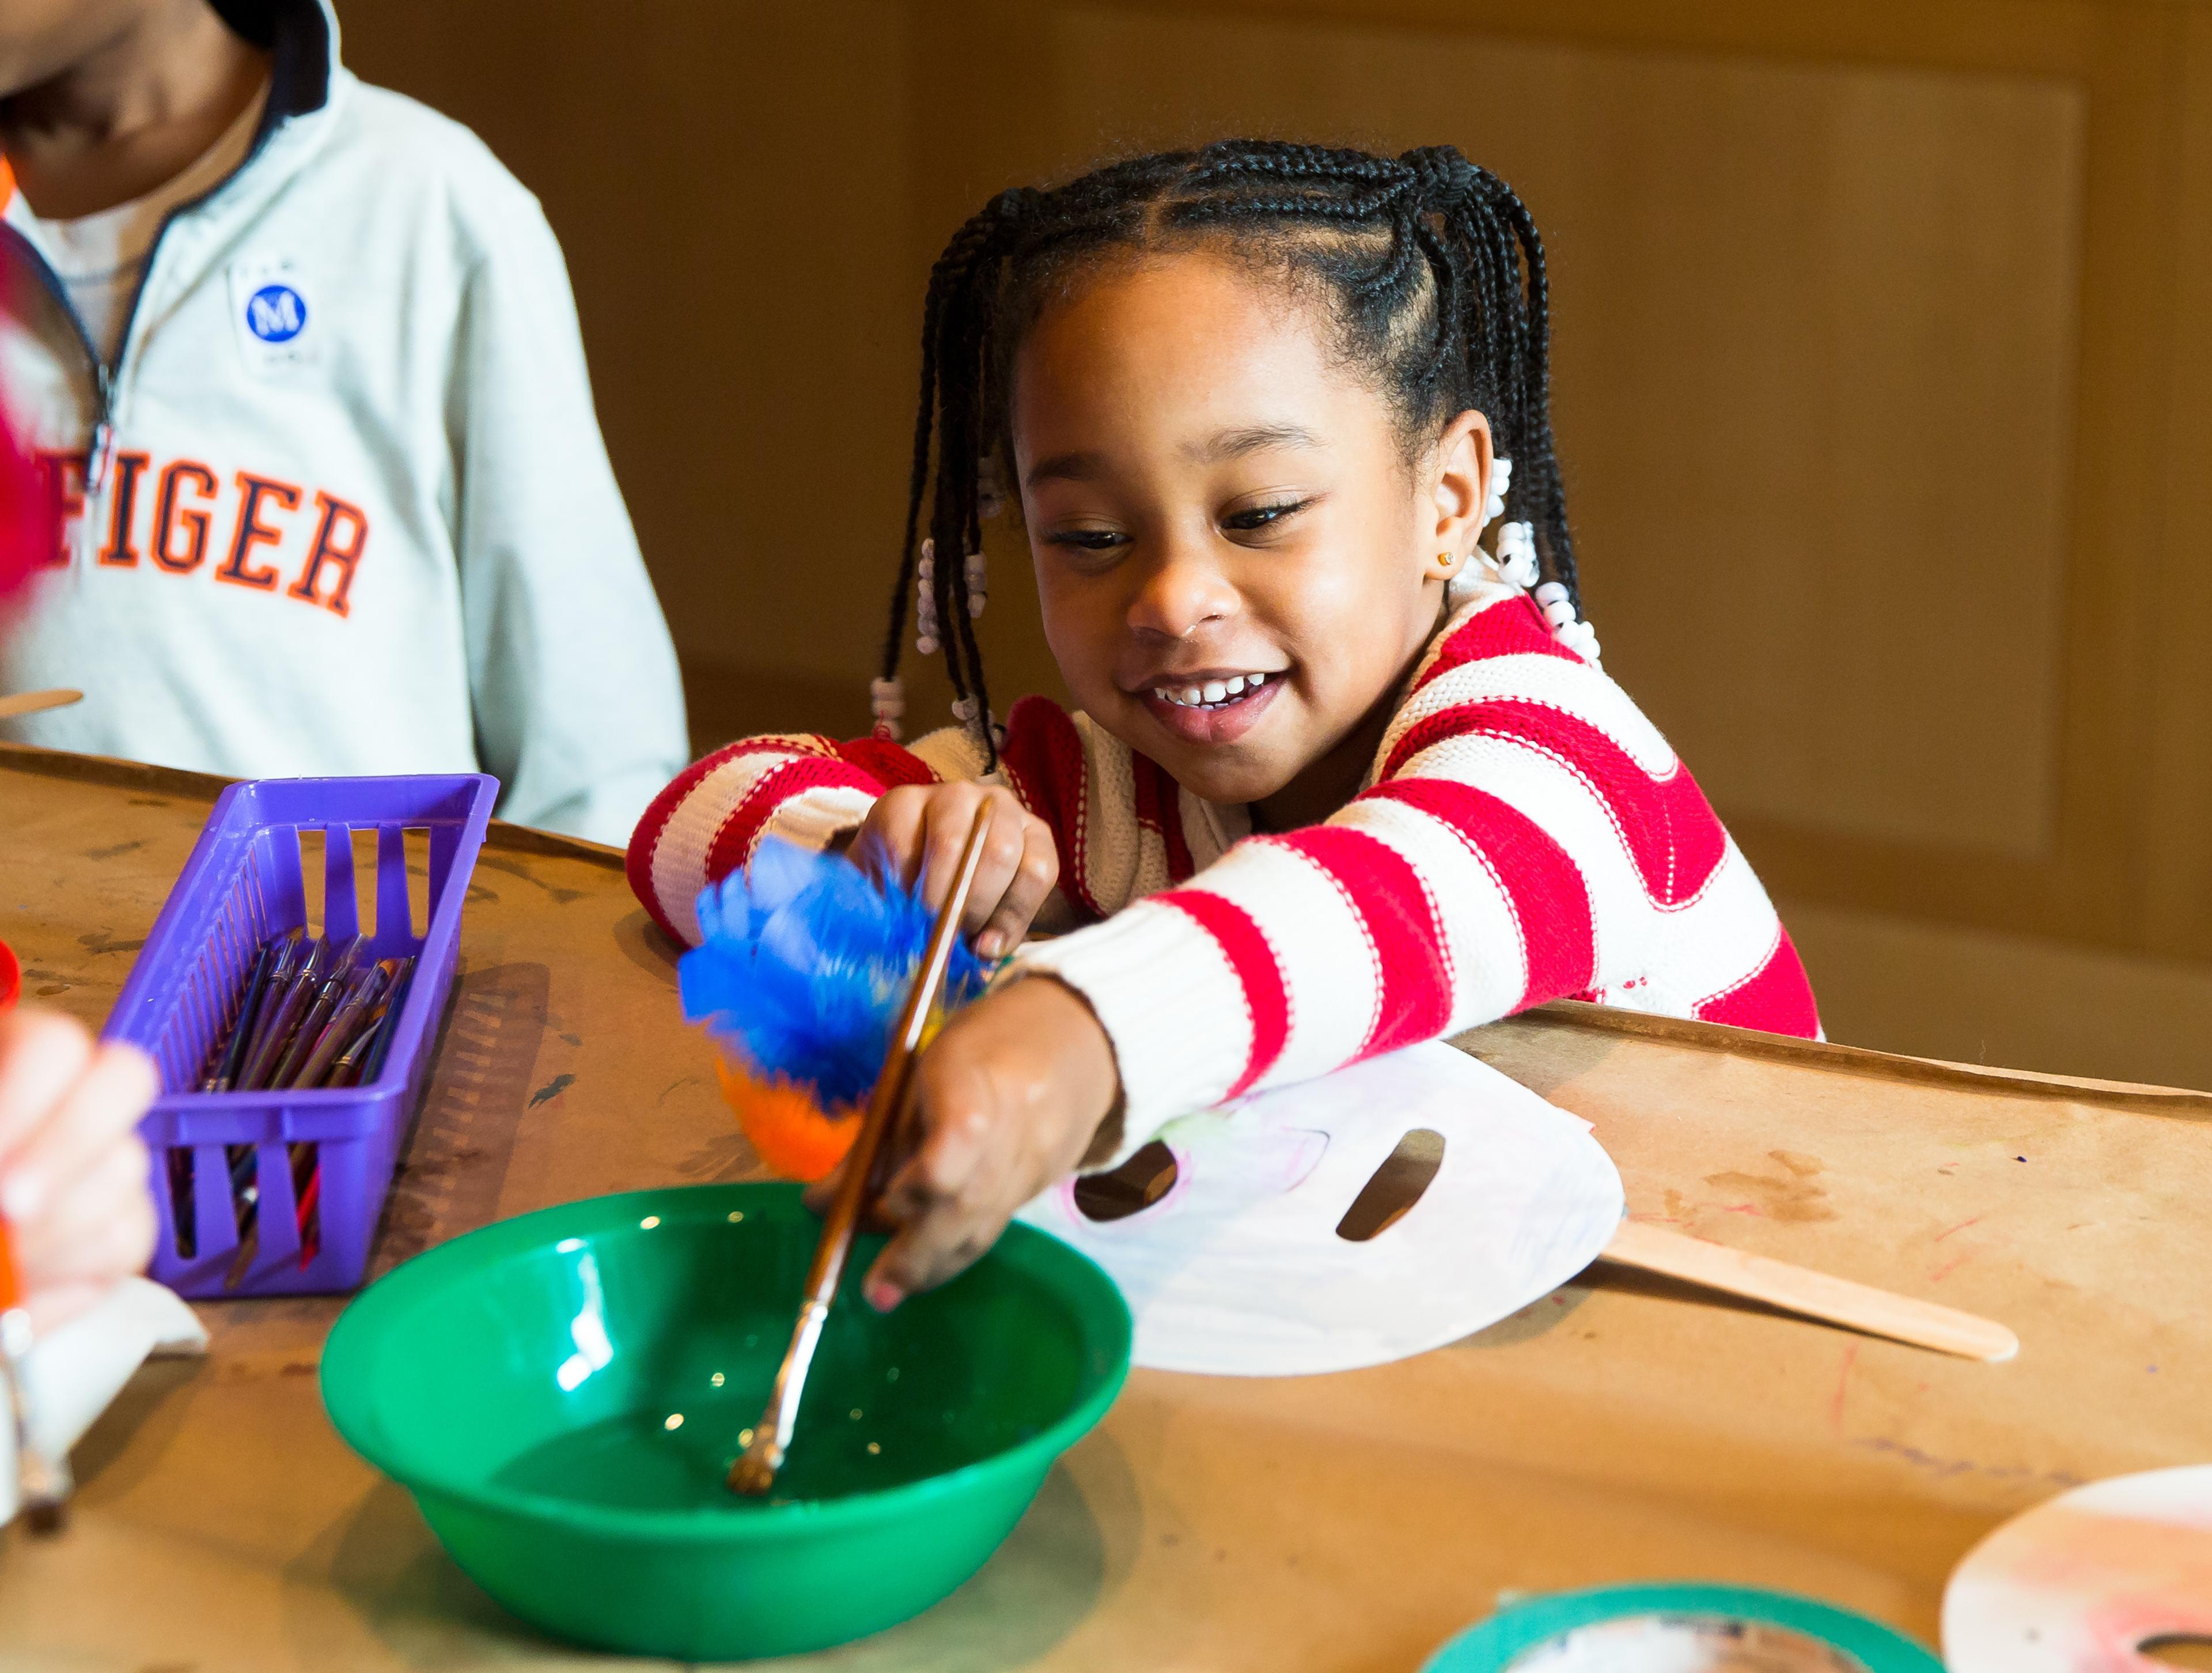 A young Black girl smiles as she participates in an art making activitiy.